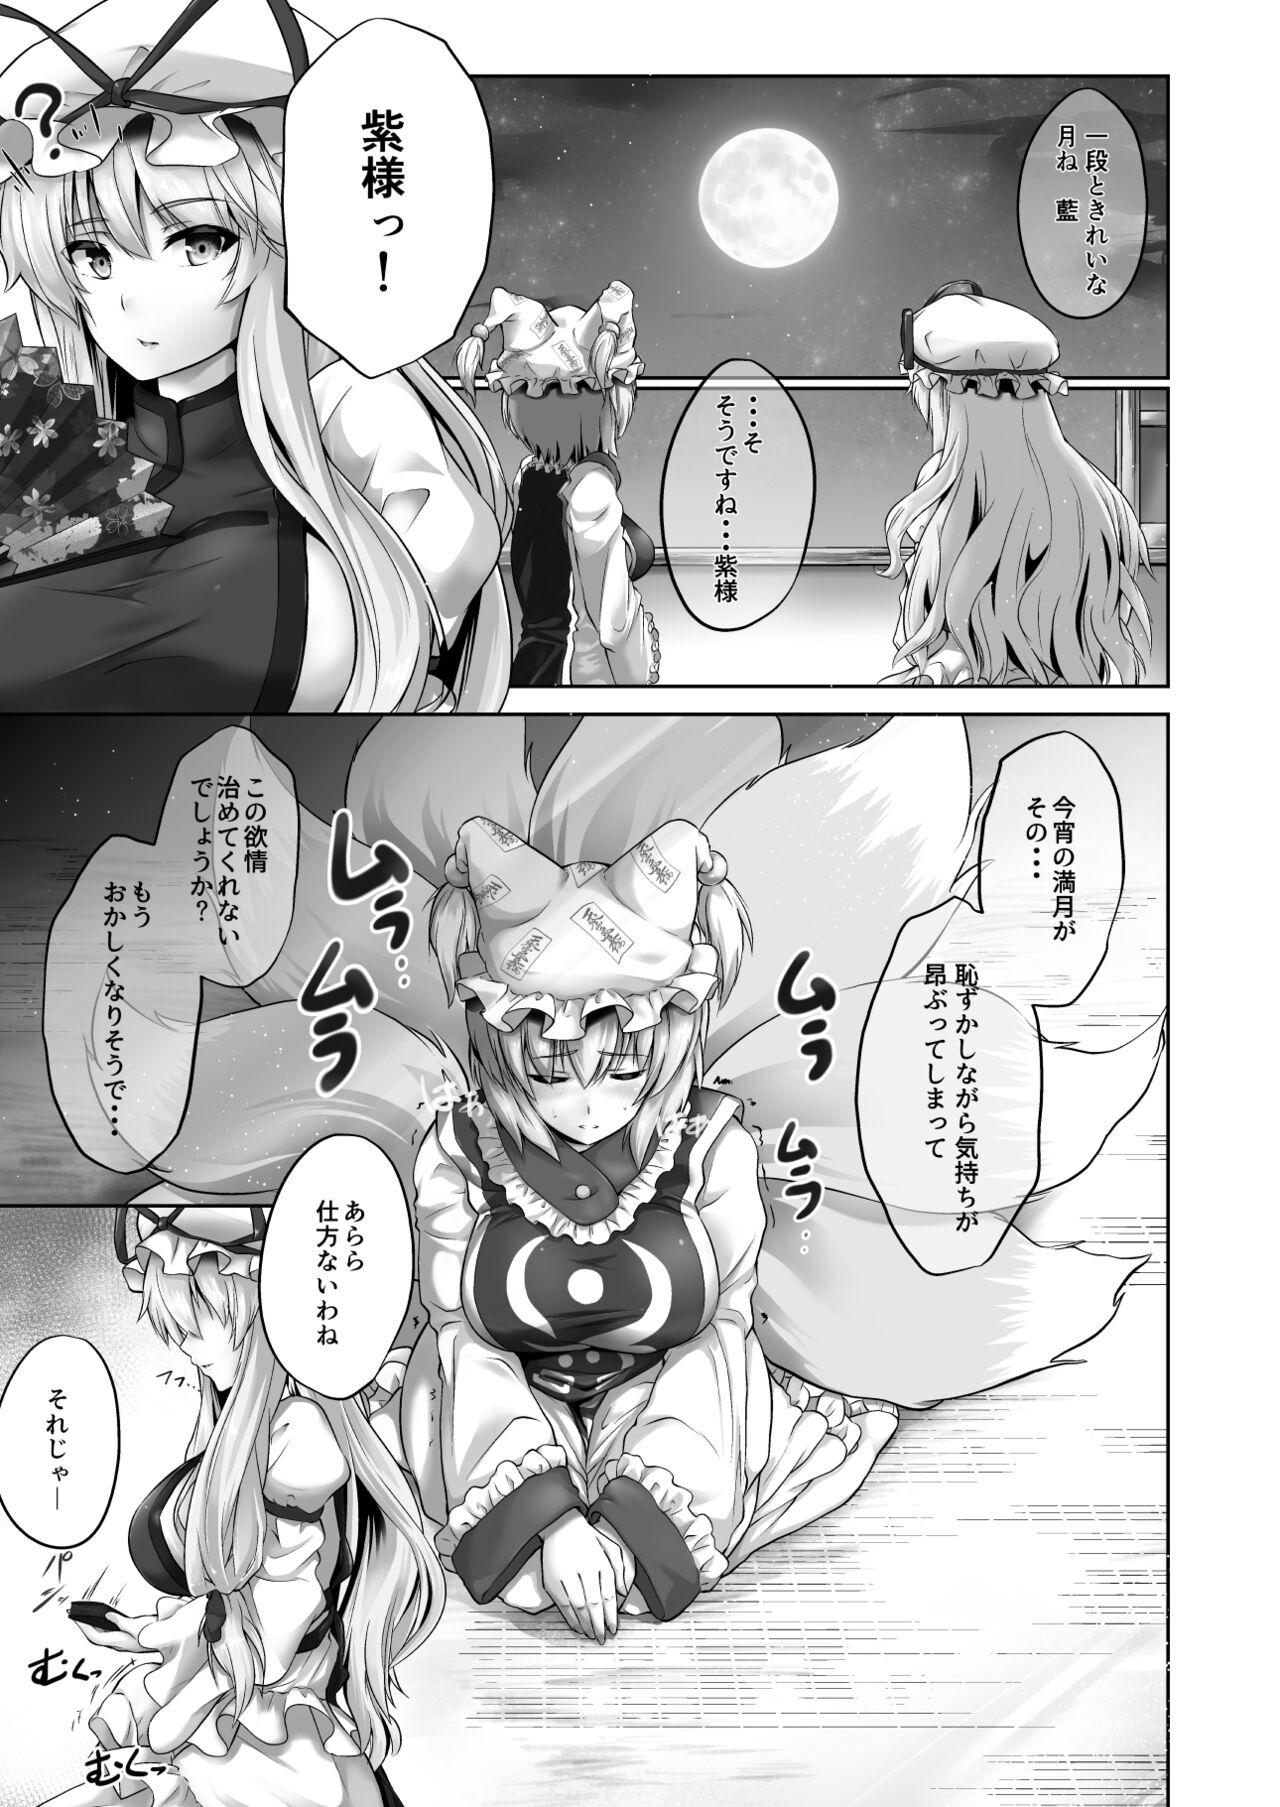 Muscles Participation in the "Oriental Mass Ejaculation Combination" Joint Magazine - Touhou project Follando - Picture 1